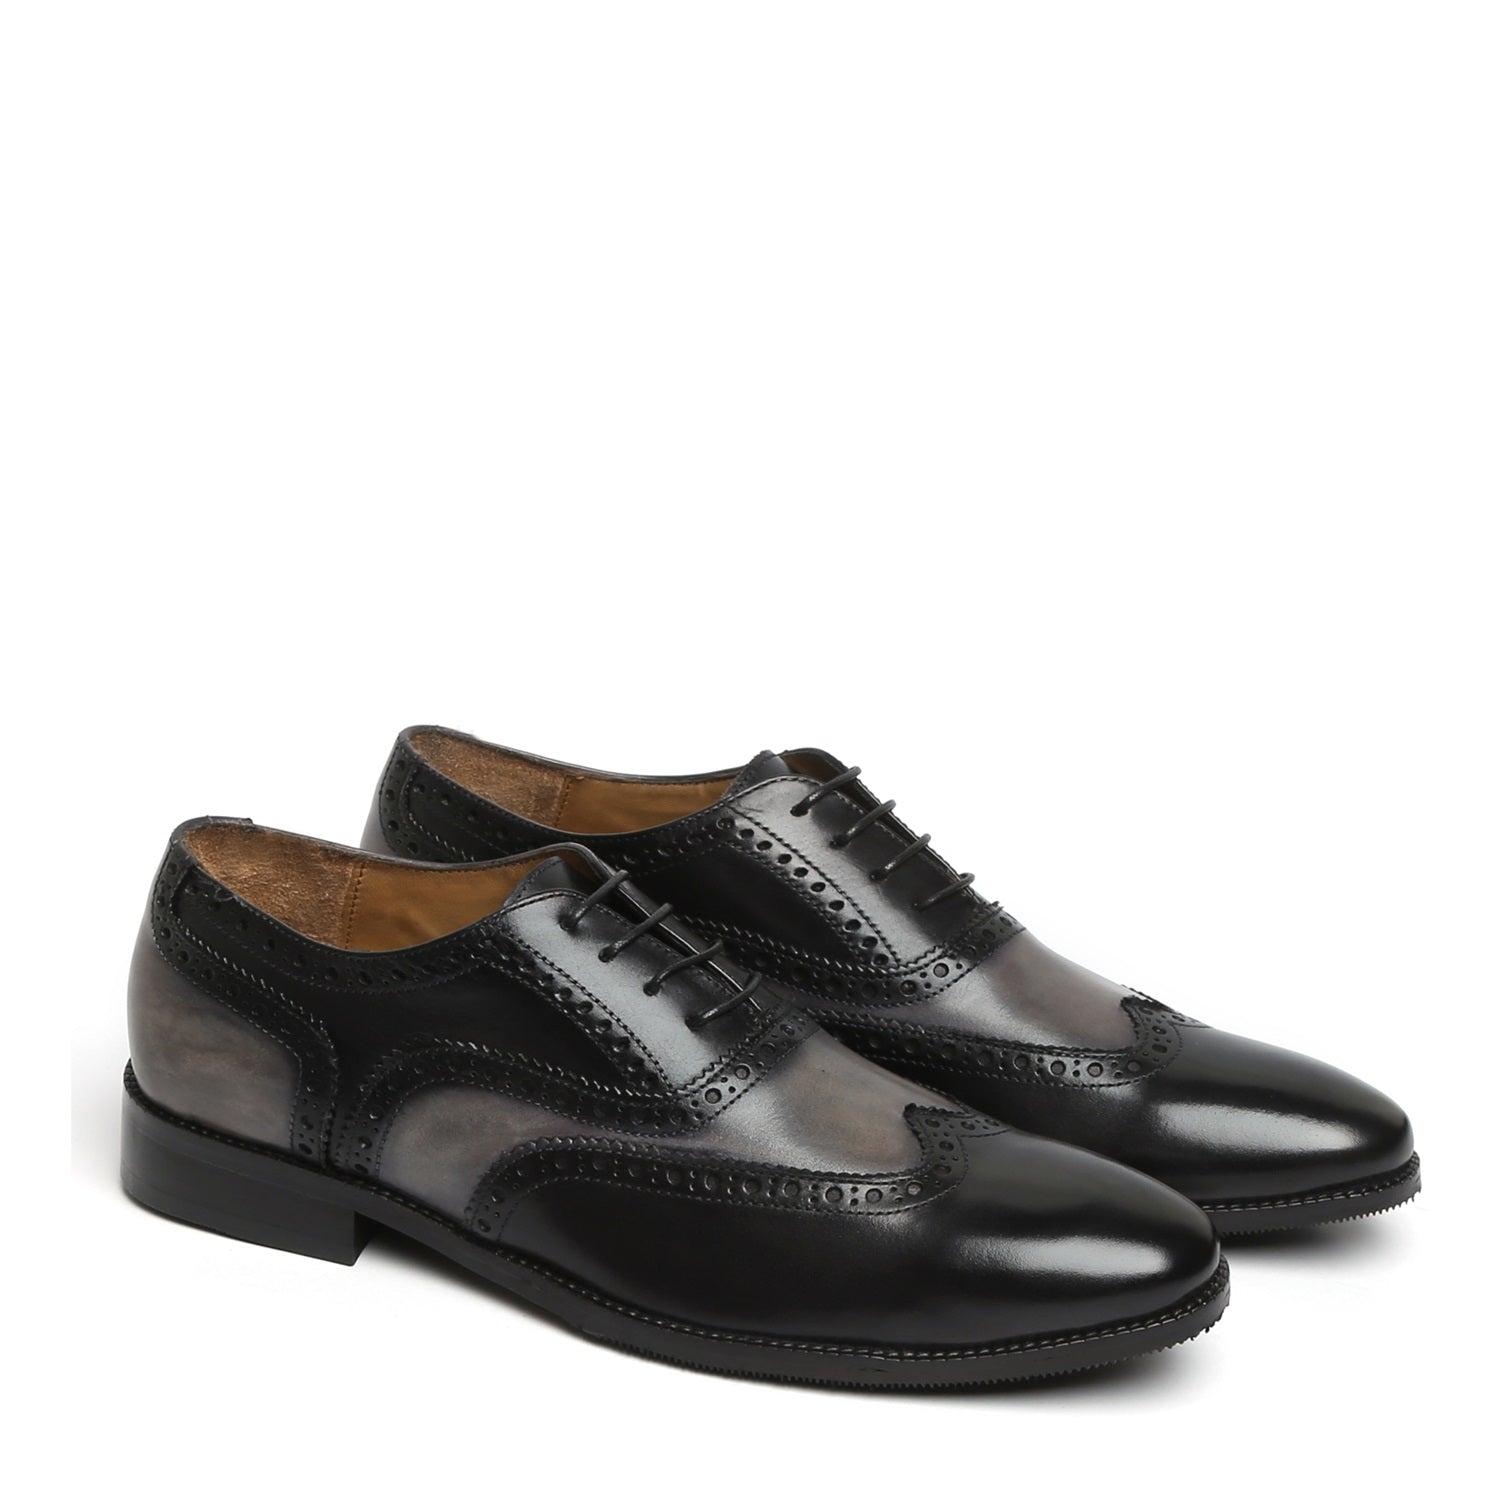 Grey Black Formal Shoe In Dual Tone Punching Brogue Leather Oxford Lace-Up